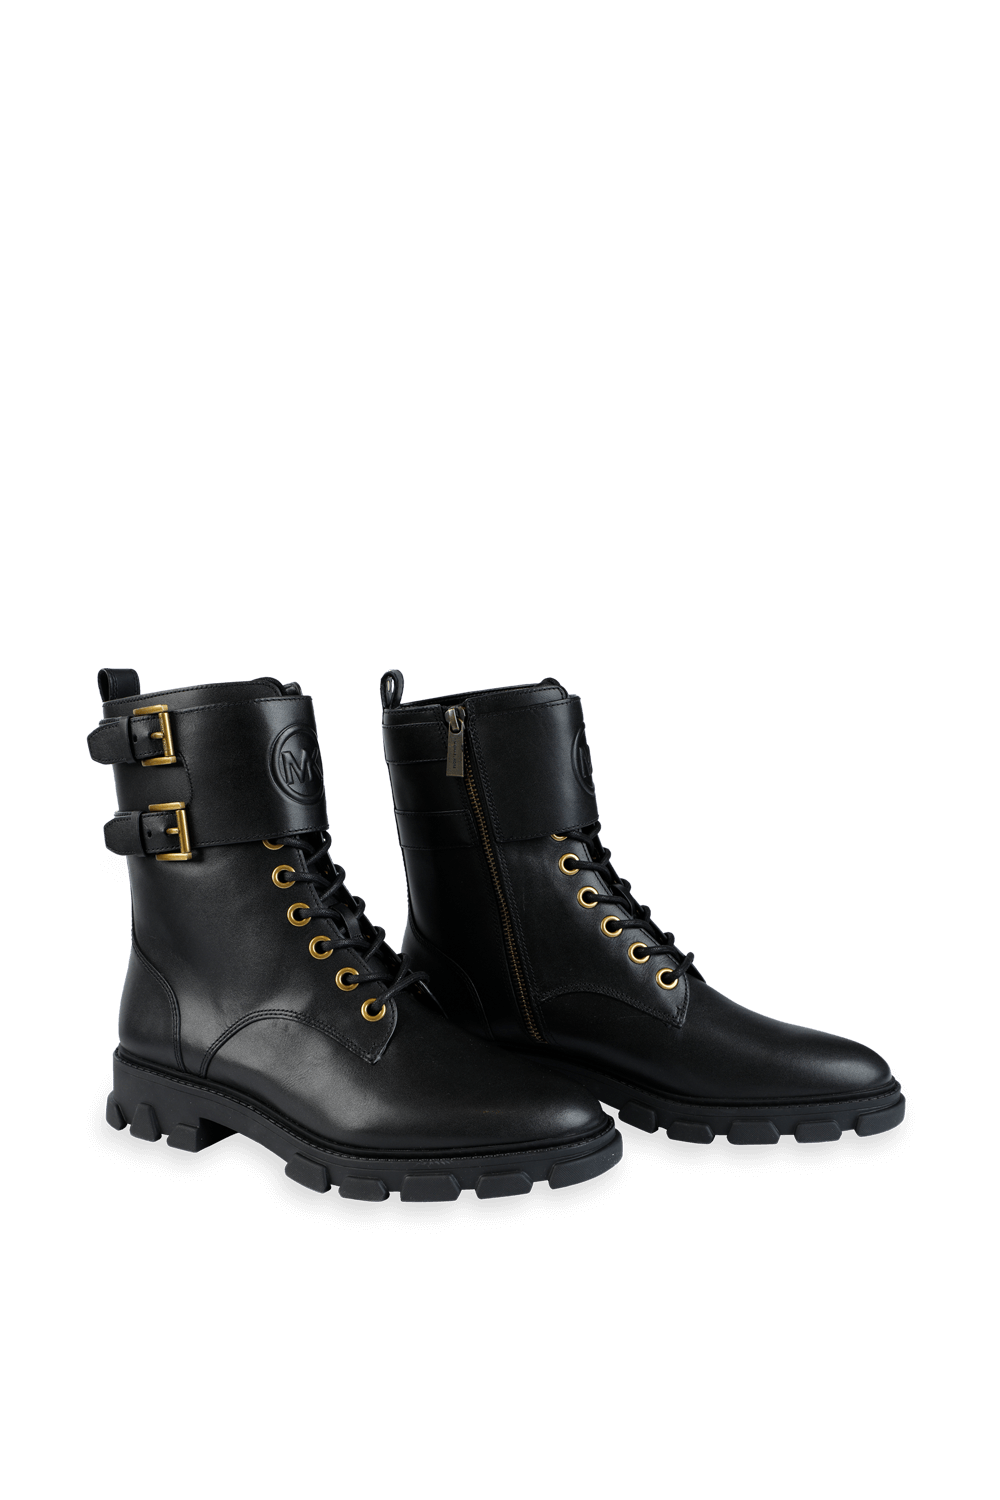 Ridley Leather Combat Boot in Black MICHAEL KORS